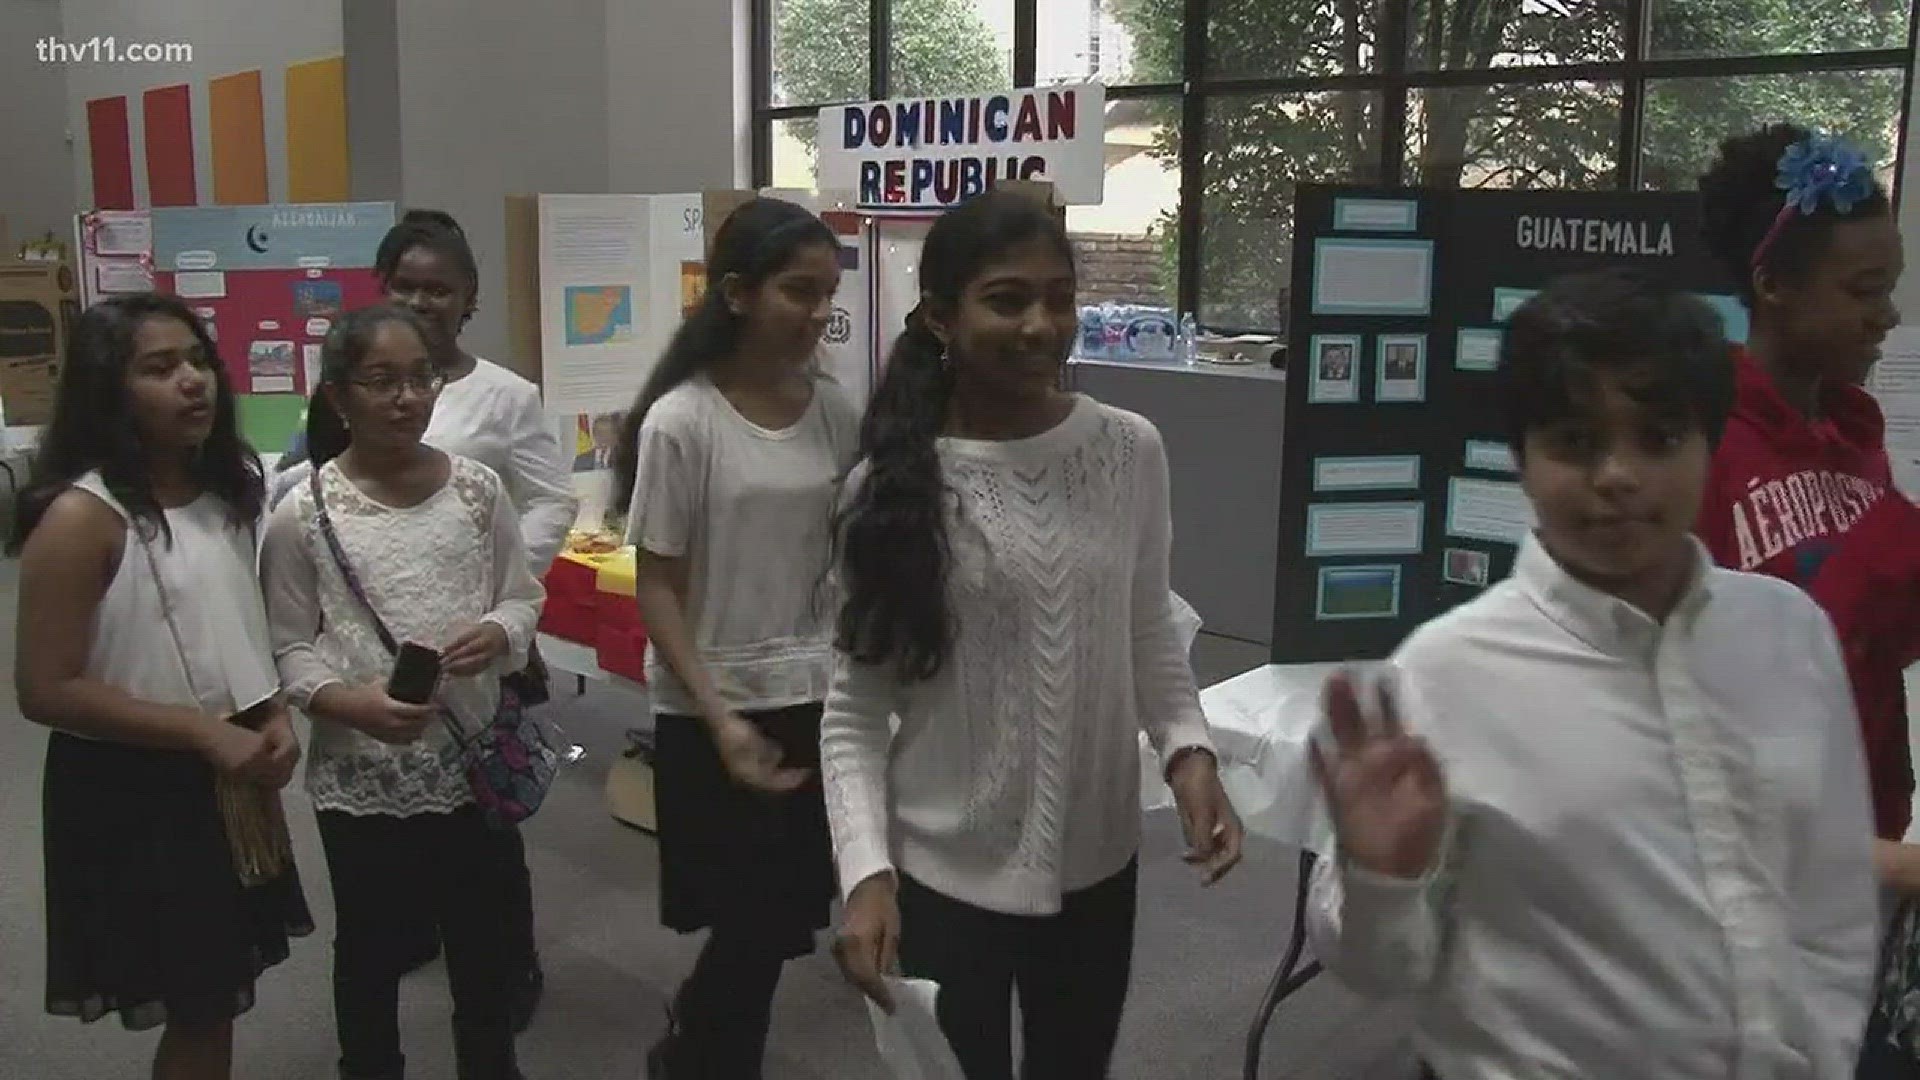 The students taught each other crucial life lessons by showcasing their own cultures.